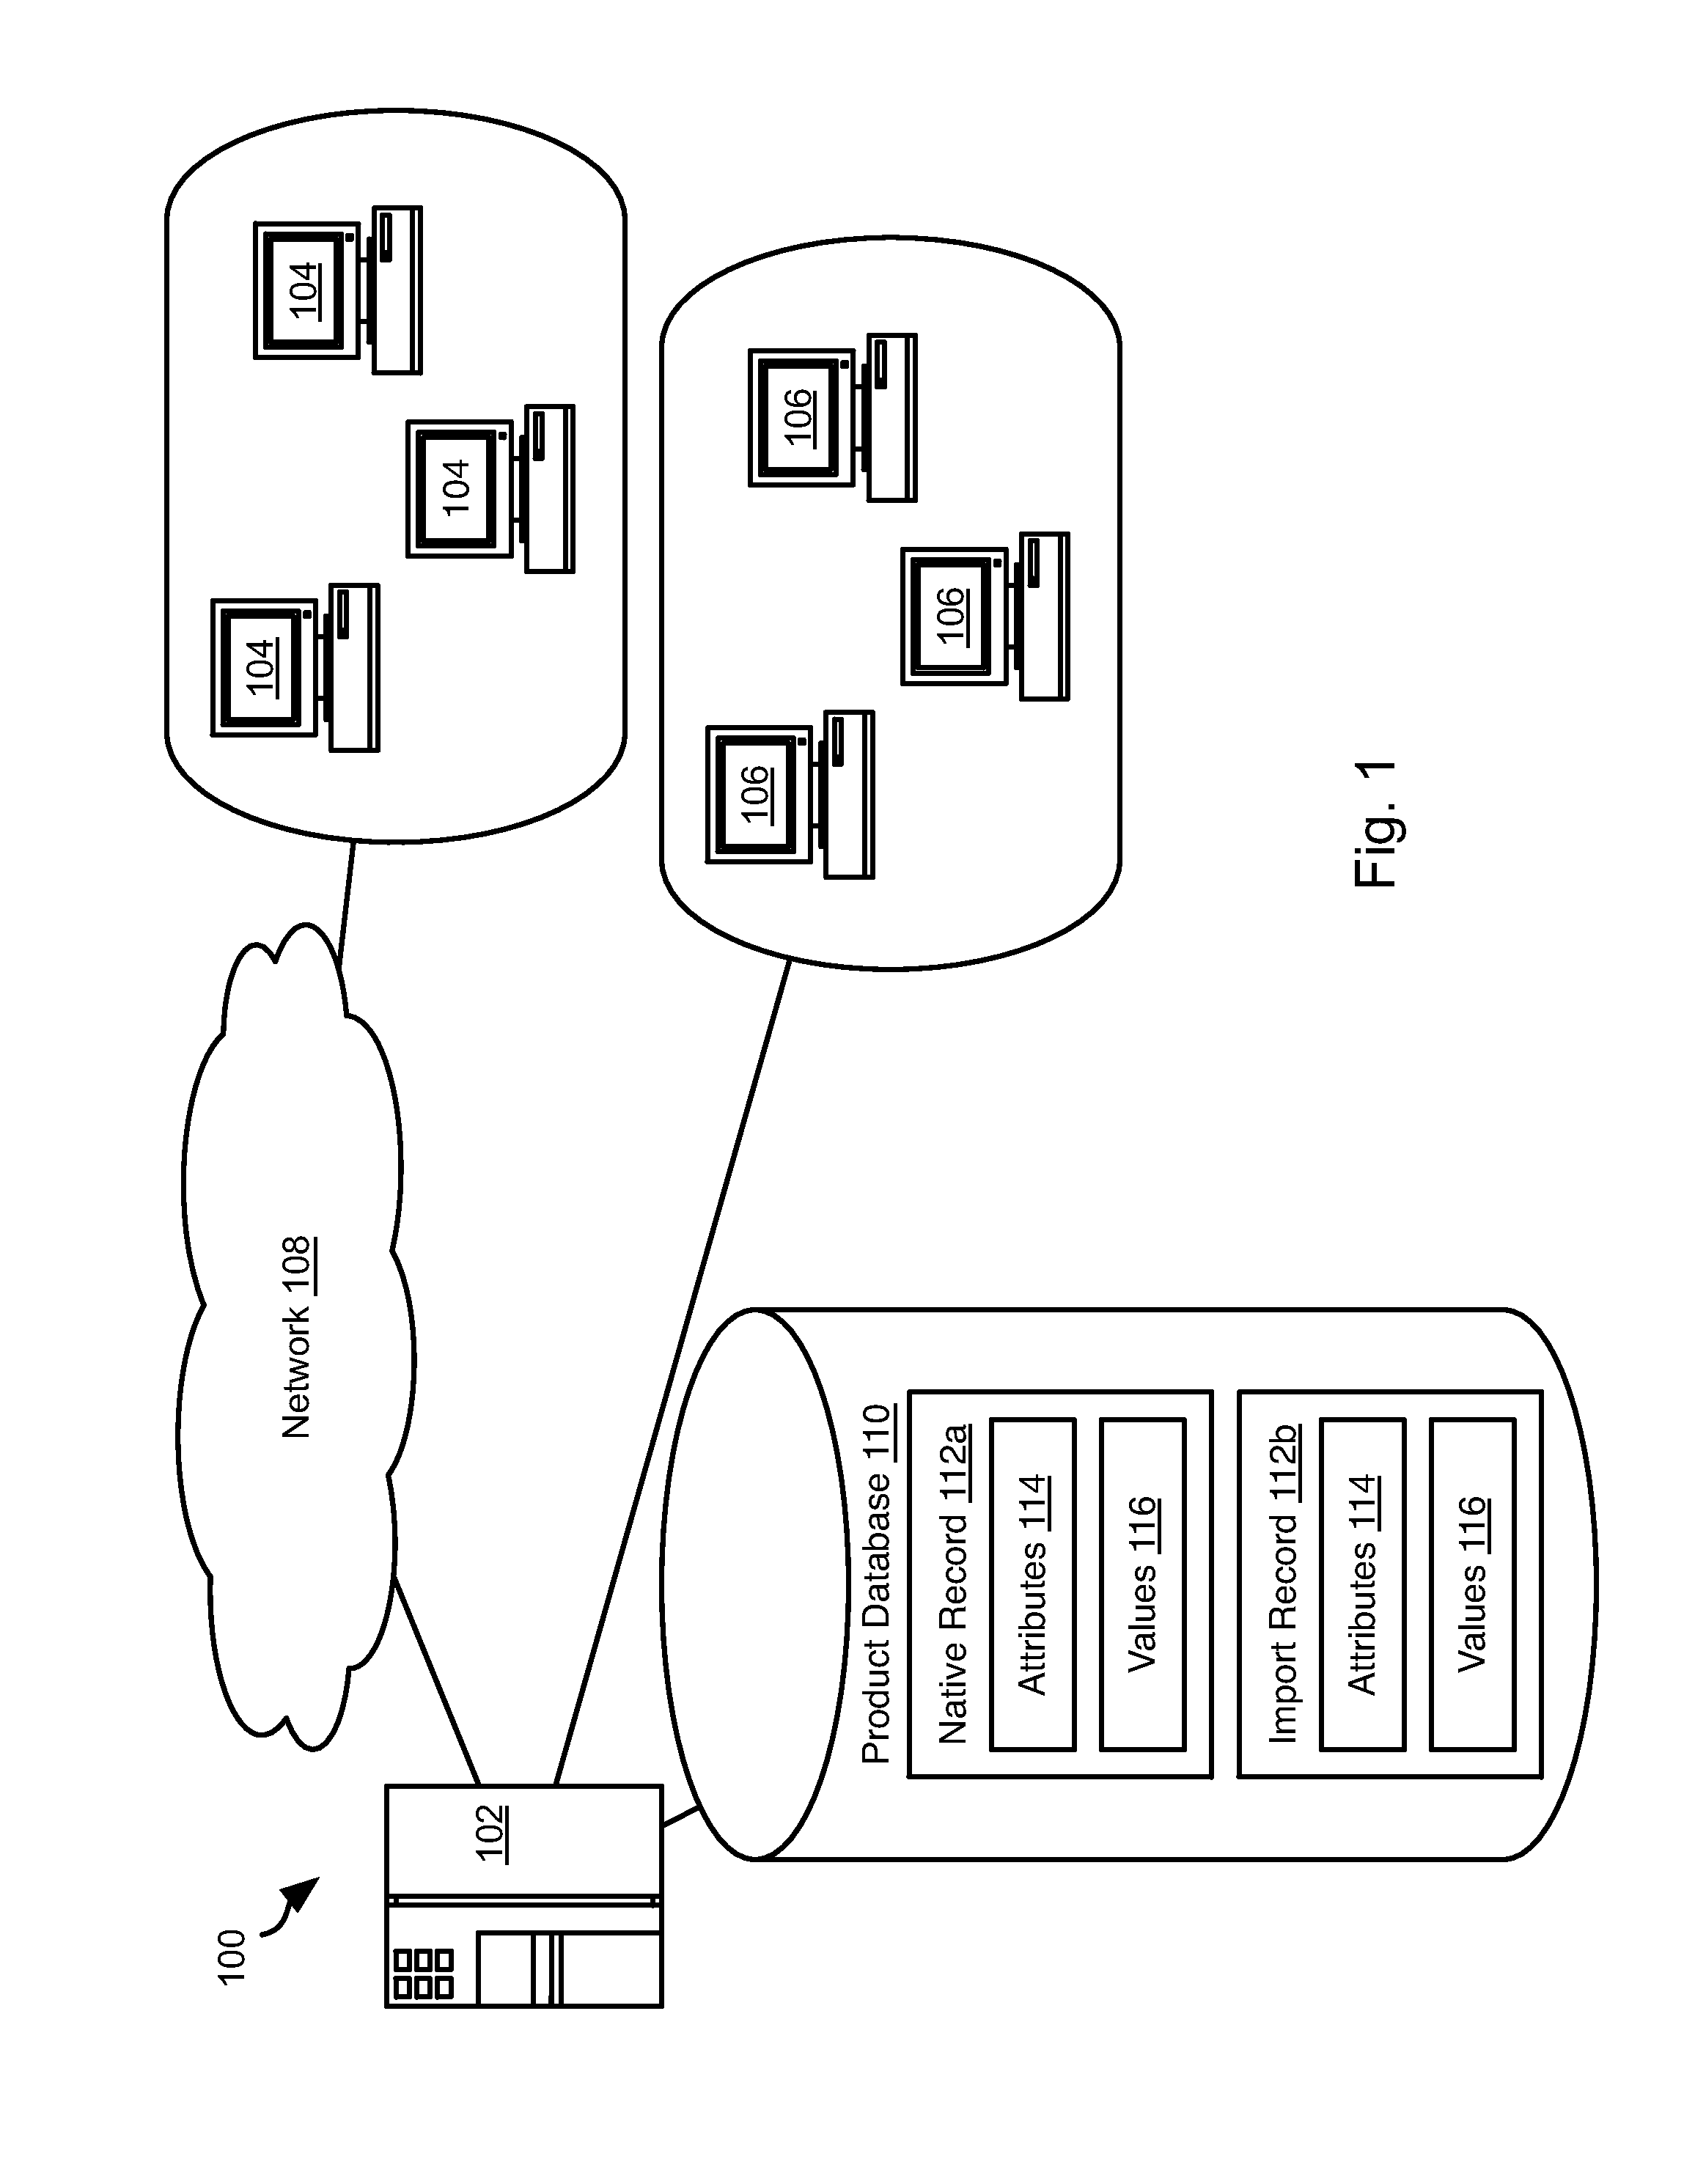 Product Record Normalization System With Efficient And Scalable Methods For Discovering, Validating, And Using Schema Mappings